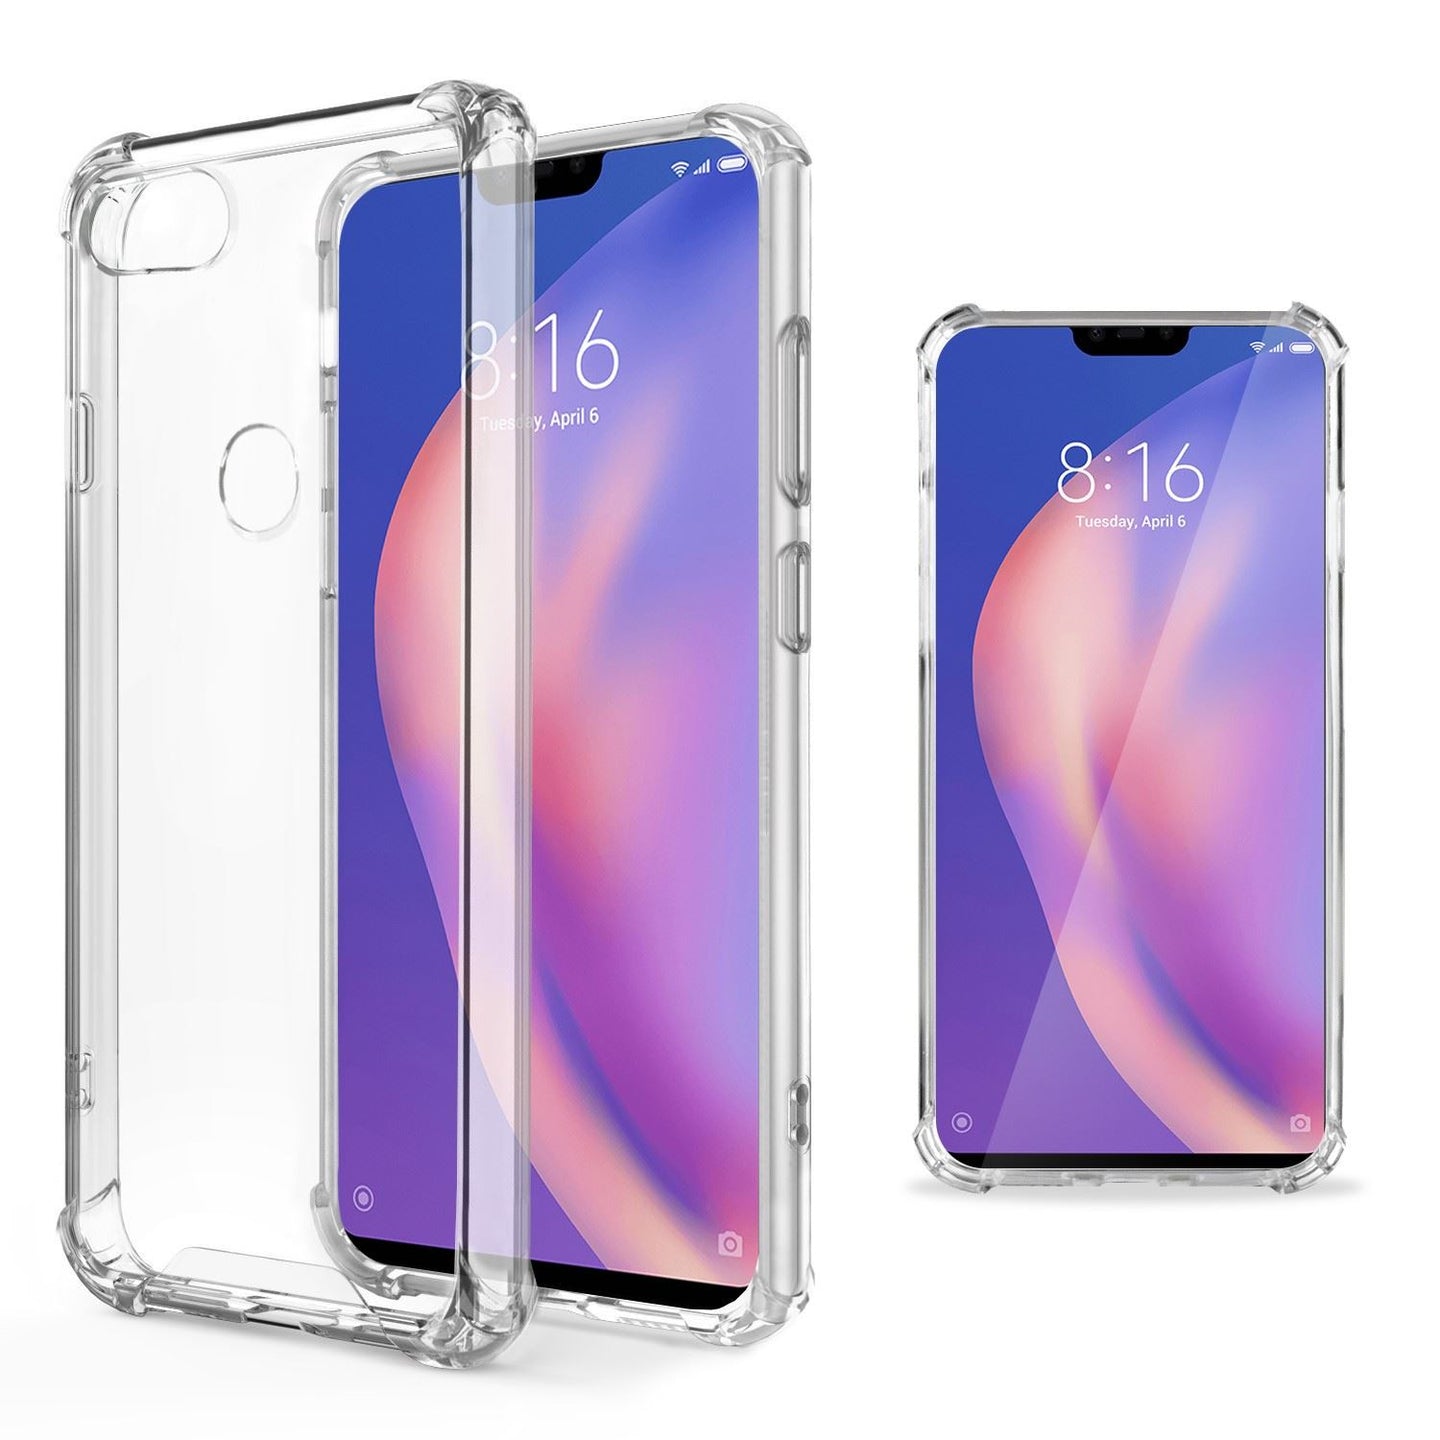 Moozy Shock Proof Silicone Case for Xiaomi Mi 8 Lite, Mi 8 Youth, Mi 8X - Transparent Crystal Clear Phone Case Soft TPU Cover